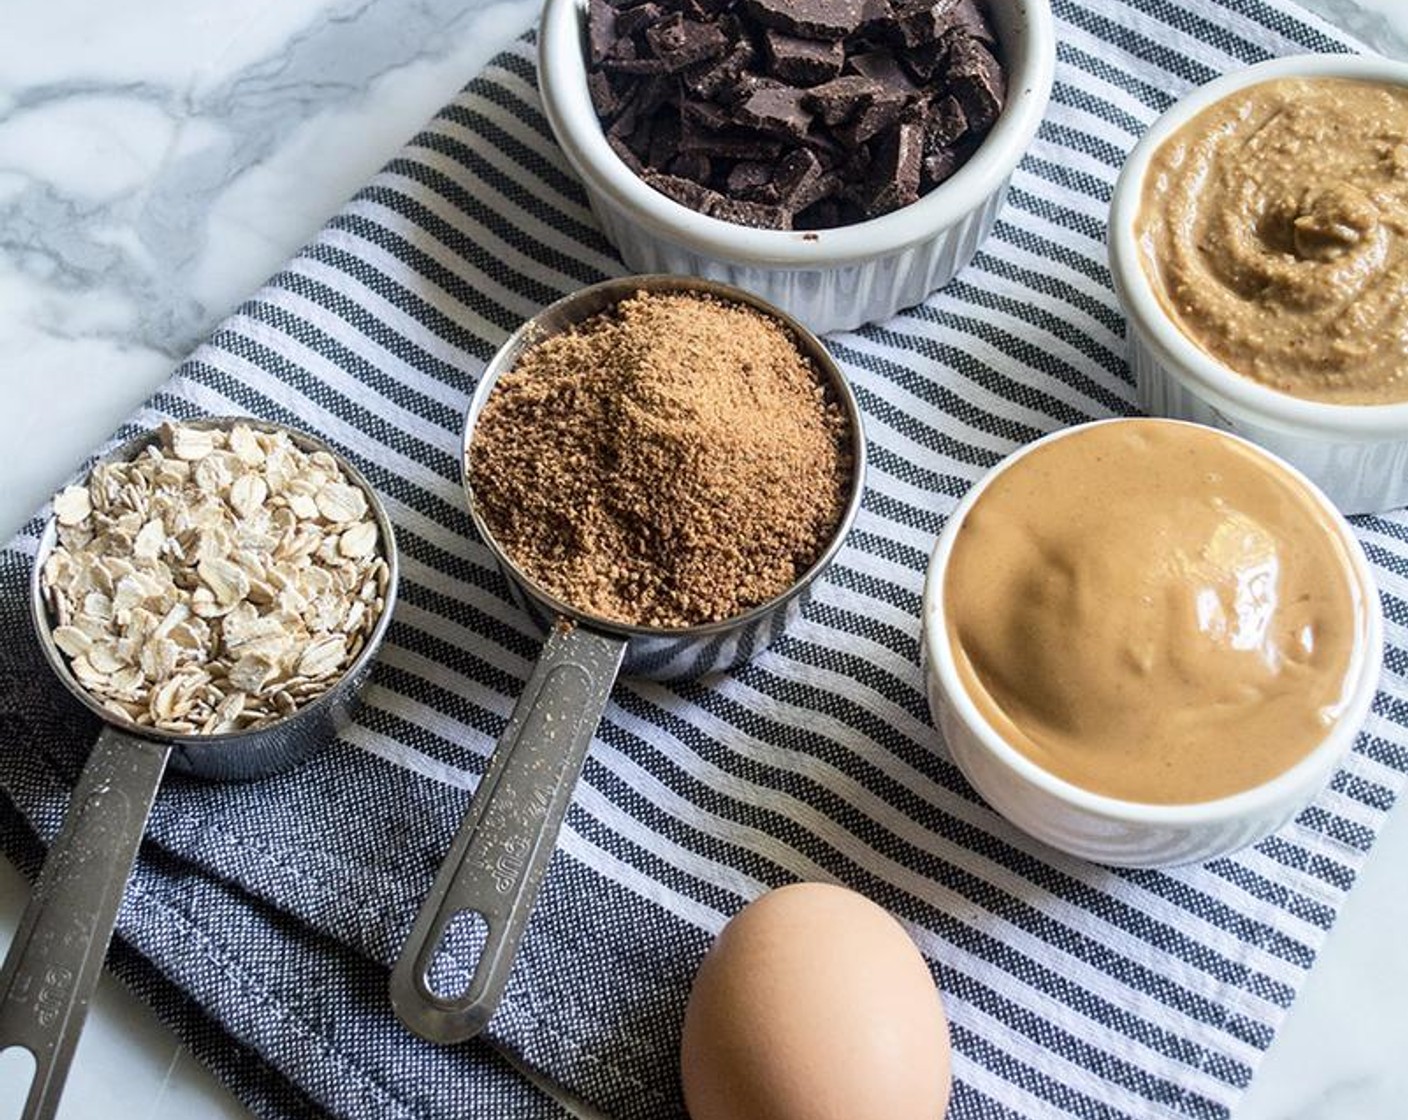 step 3 Add Peanut Butter (1/2 cup), Powdered Peanut Butter (1/2 cup), Water (1/3 cup), Coconut Sugar (2/3 cup), Baking Soda (1/2 tsp), and Sea Salt (1/8 tsp) to large bowl, and mix until well combined. Stir in Egg (1) and Vanilla Extract (1/2 Tbsp), then mix until just combined.